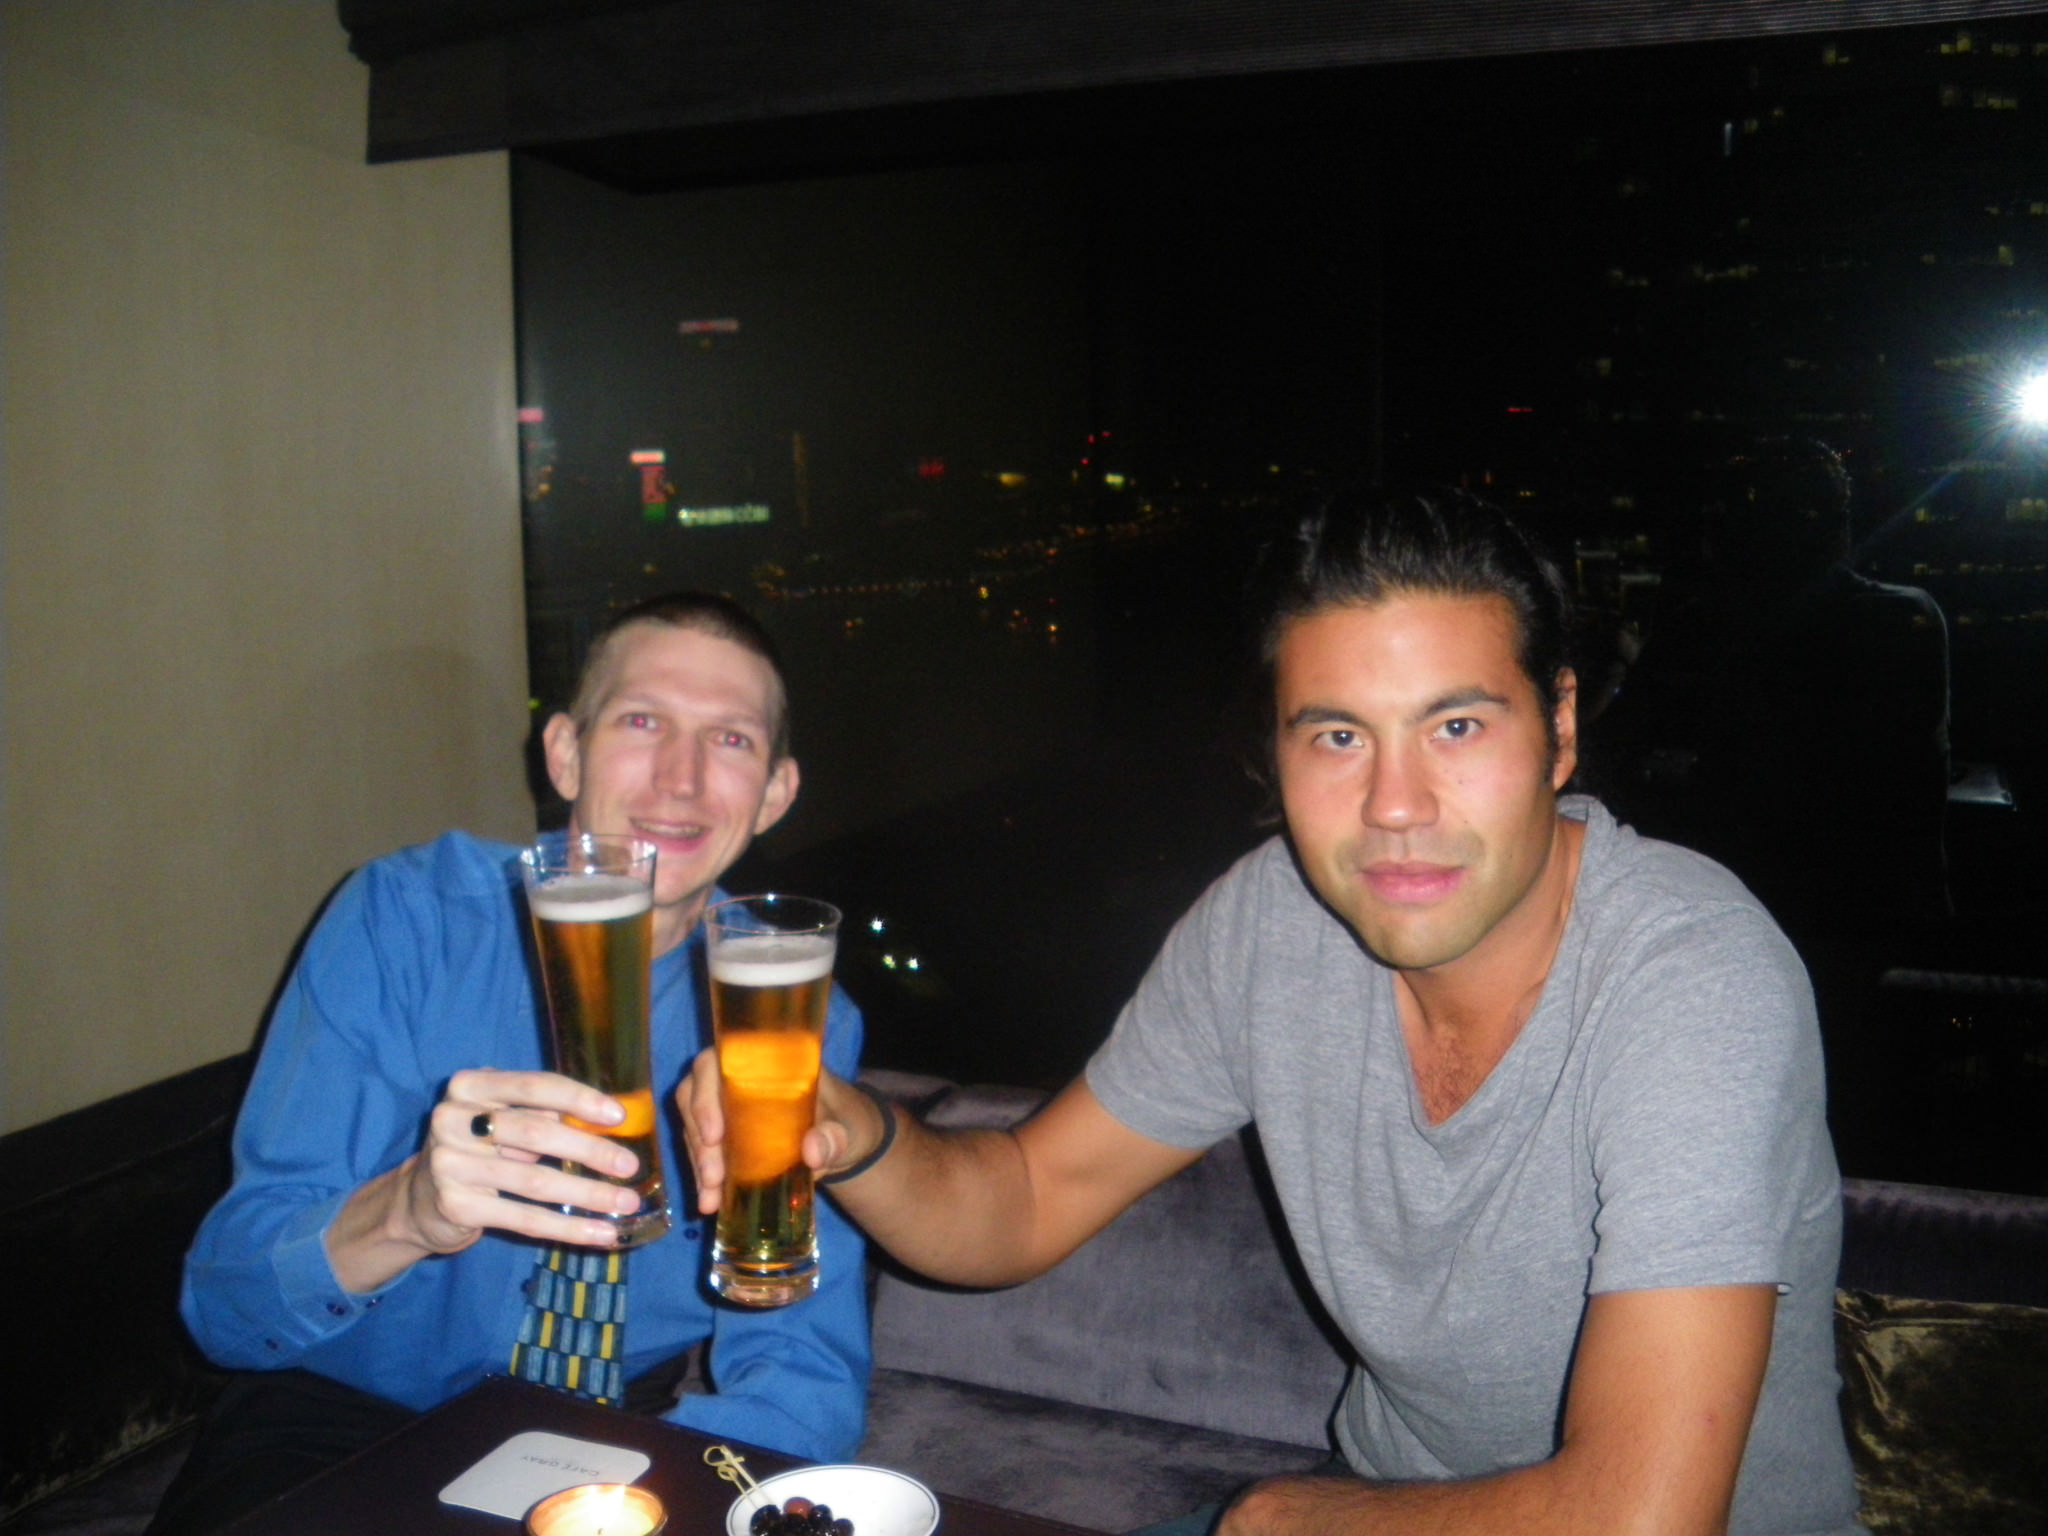 Jonny Blair lives a lifestyle of travel and enjoys a posh beer in the Upper House Hotel in Hong Kong